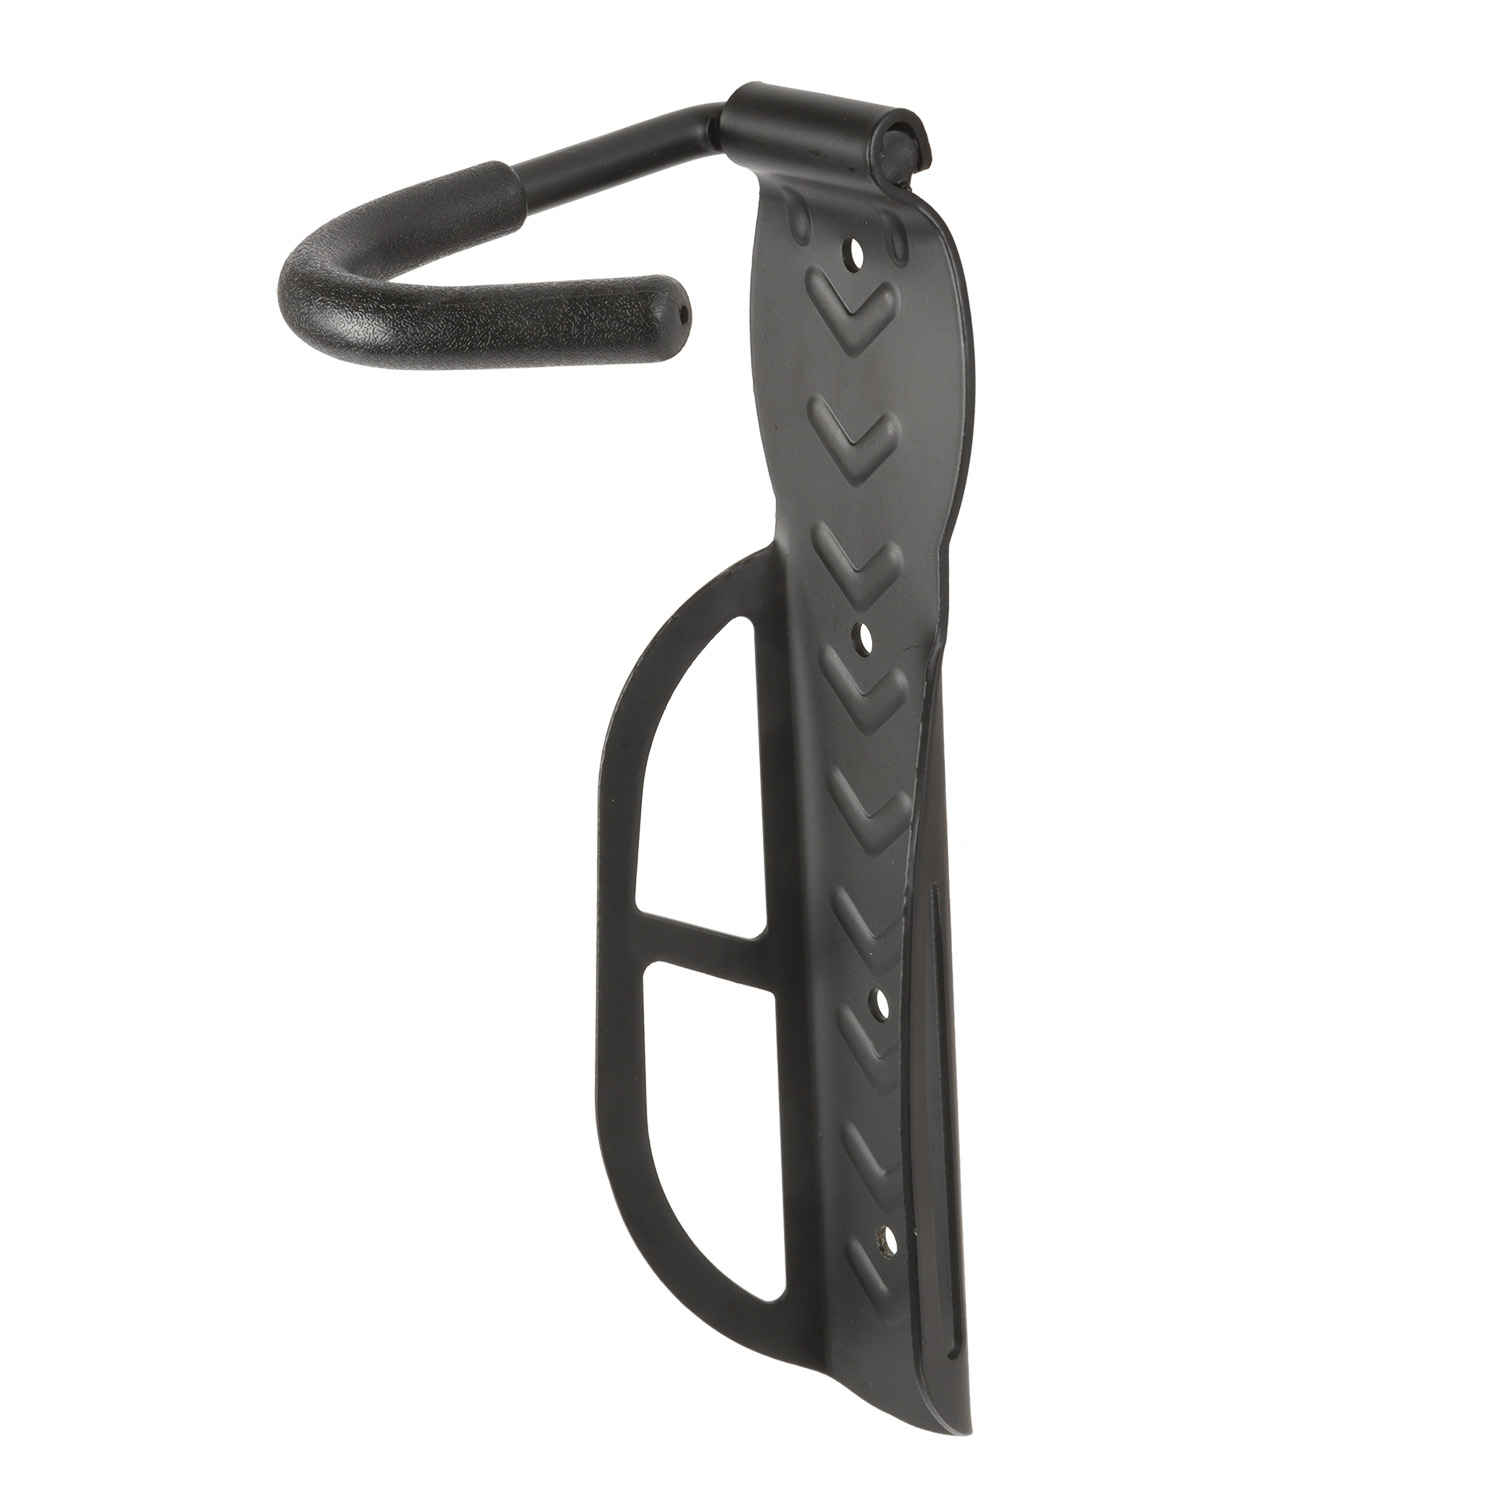 VENTURA Wheel bicycle depot hanger – AVAILABLE IN SELECTED BIKE SHOPS